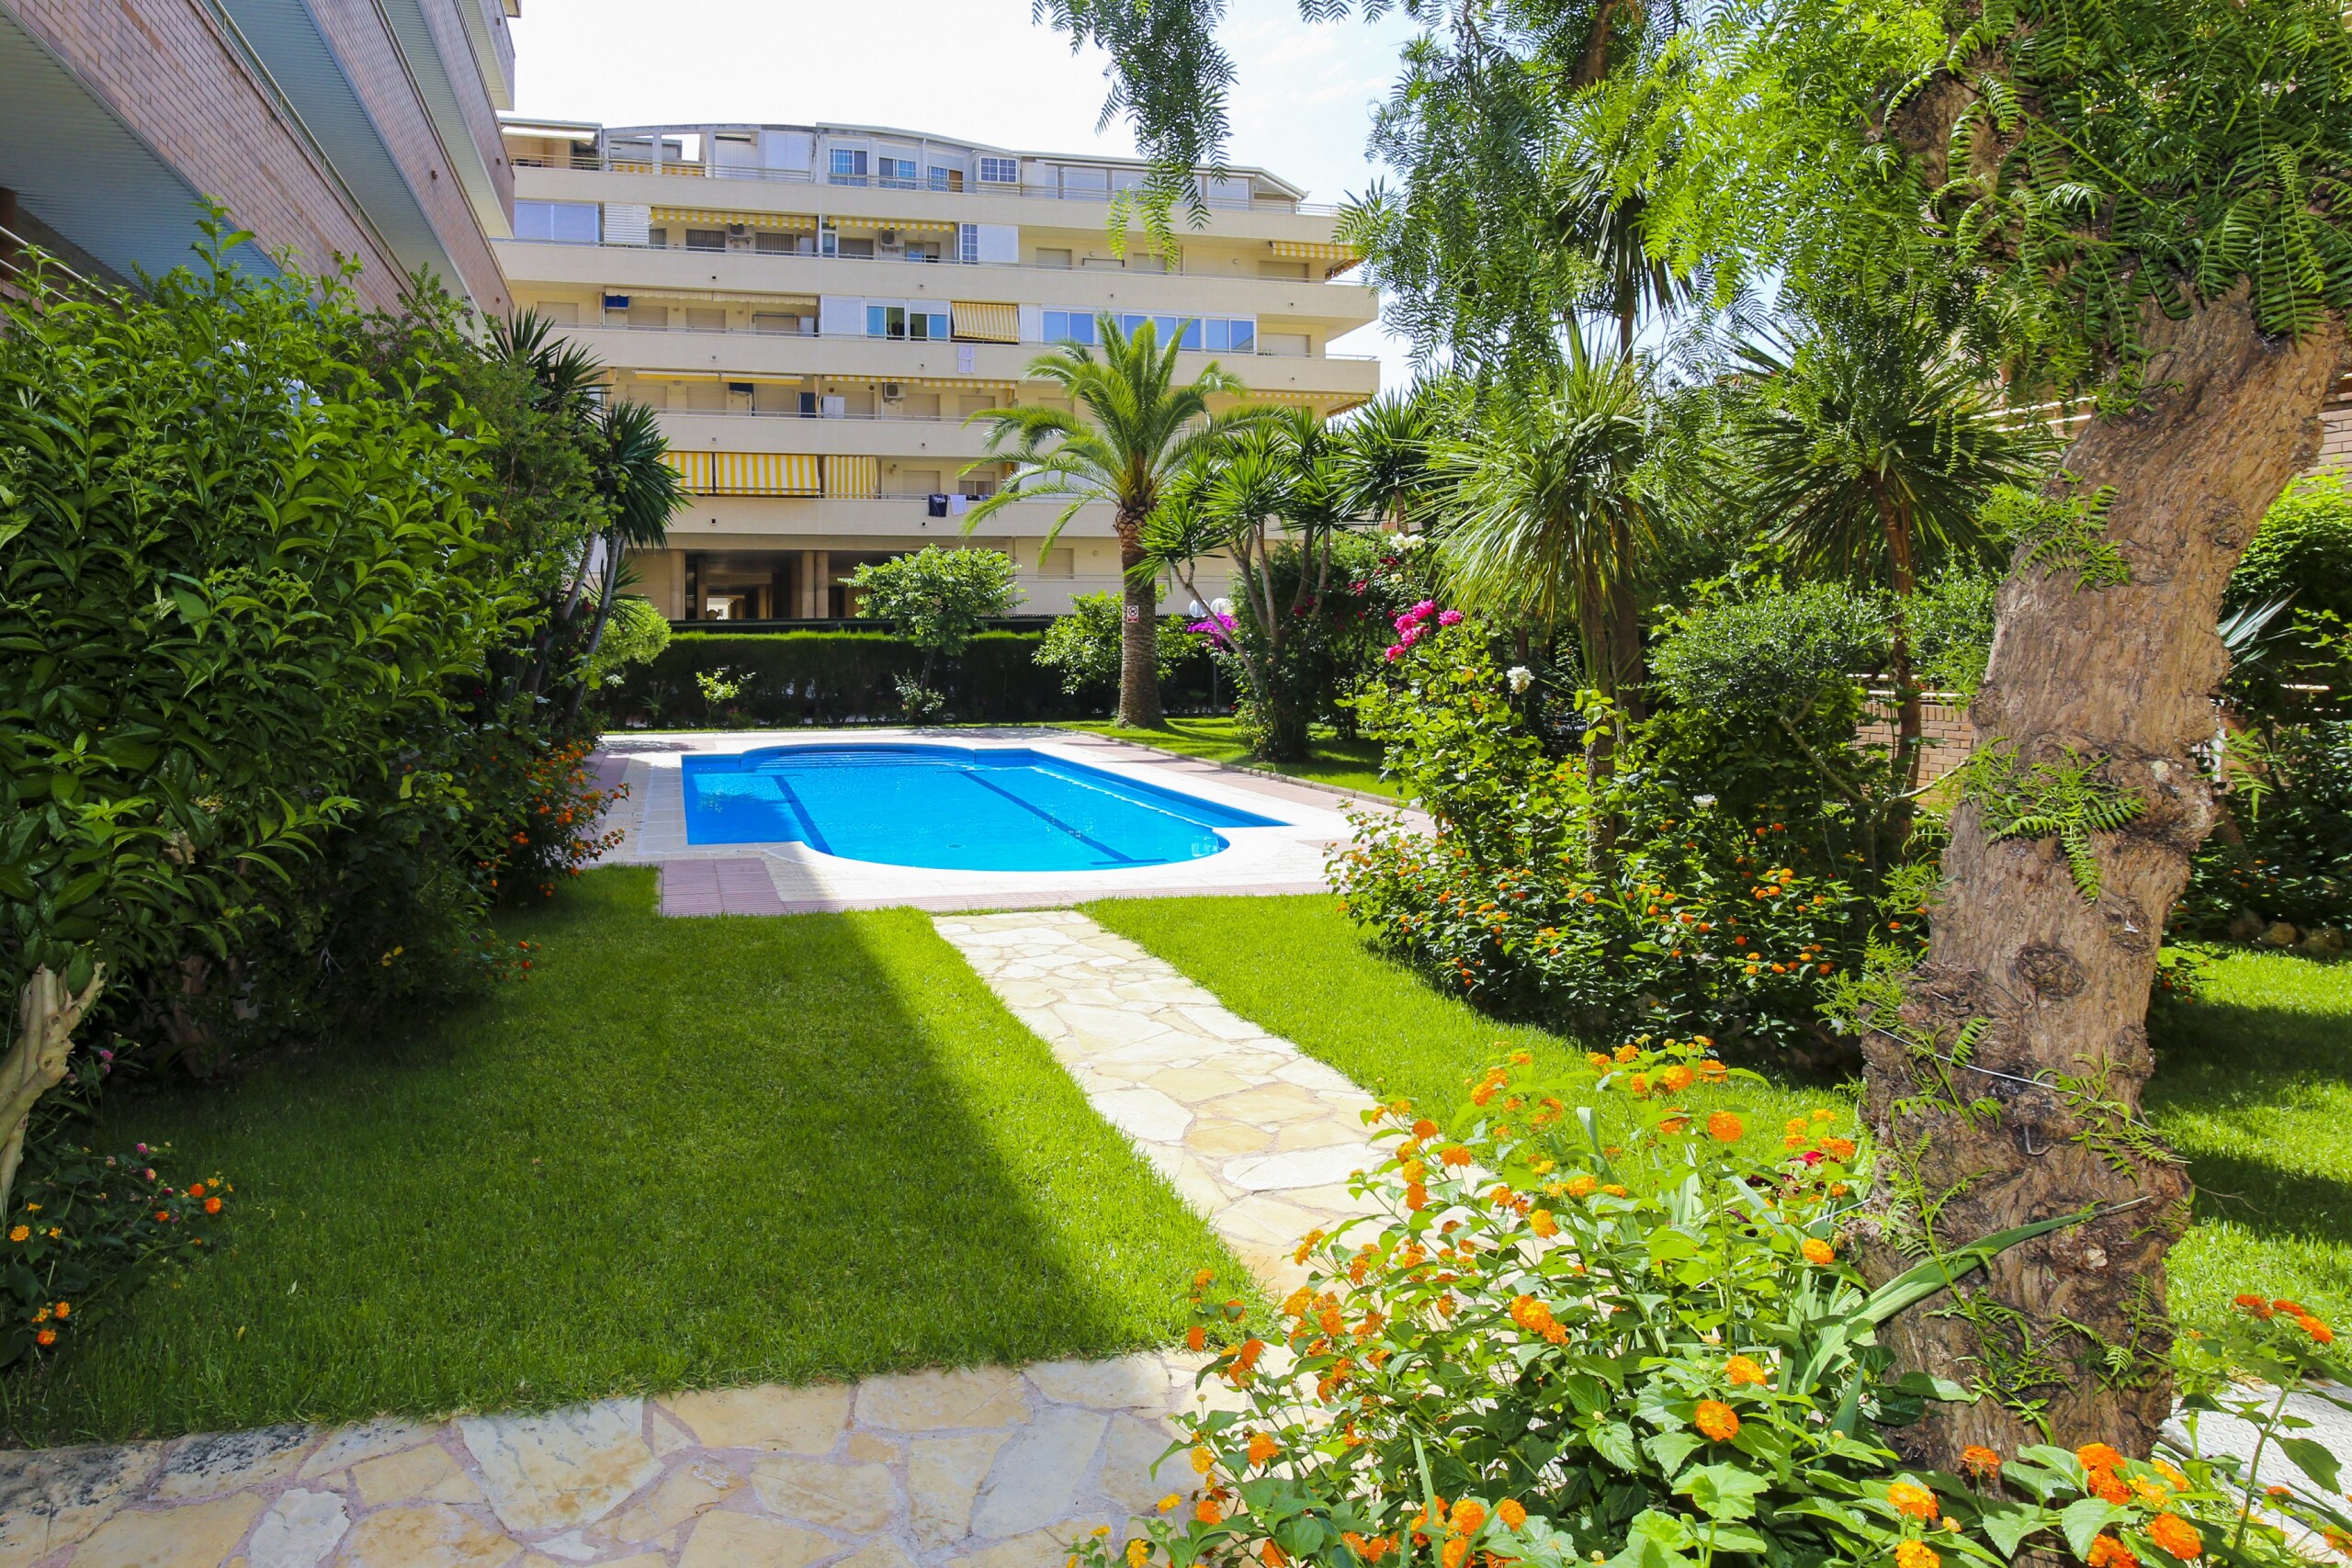 Property Image 2 - Cosy apartment with pool in Vila-seca